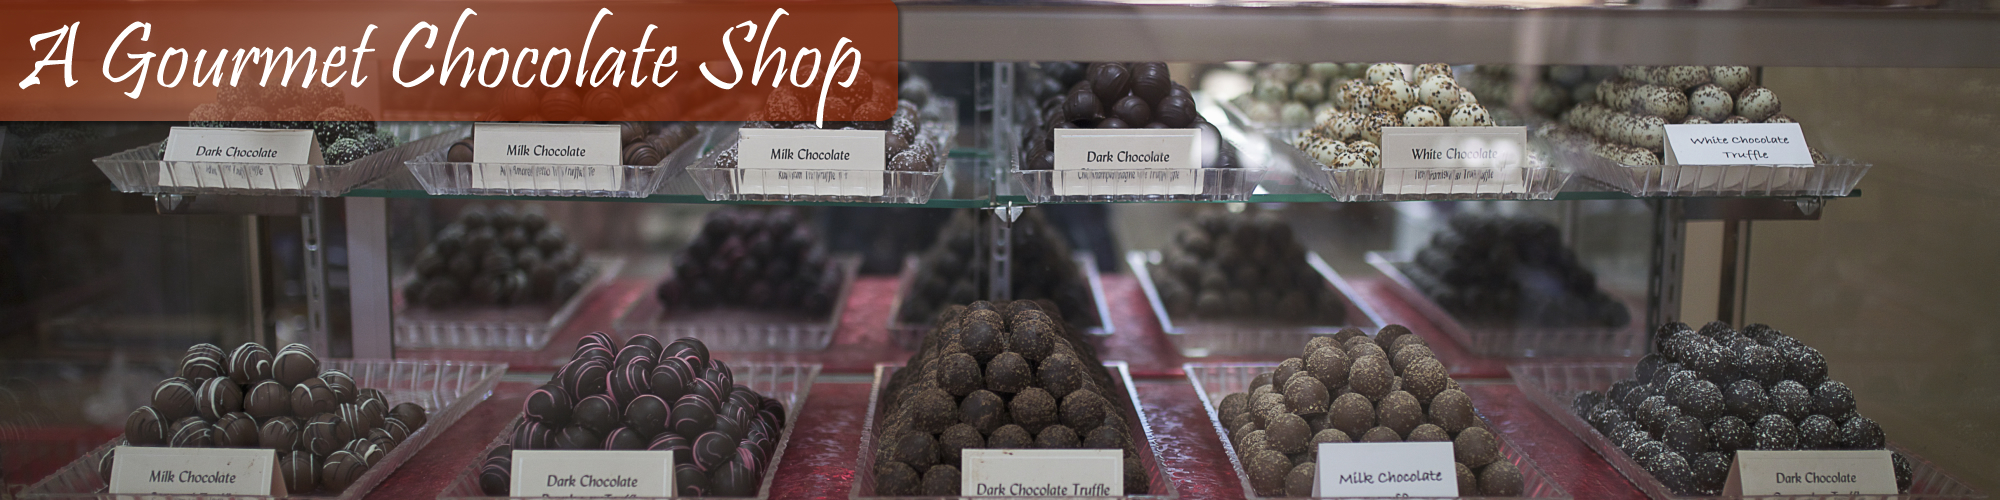 Candy Store Header Image